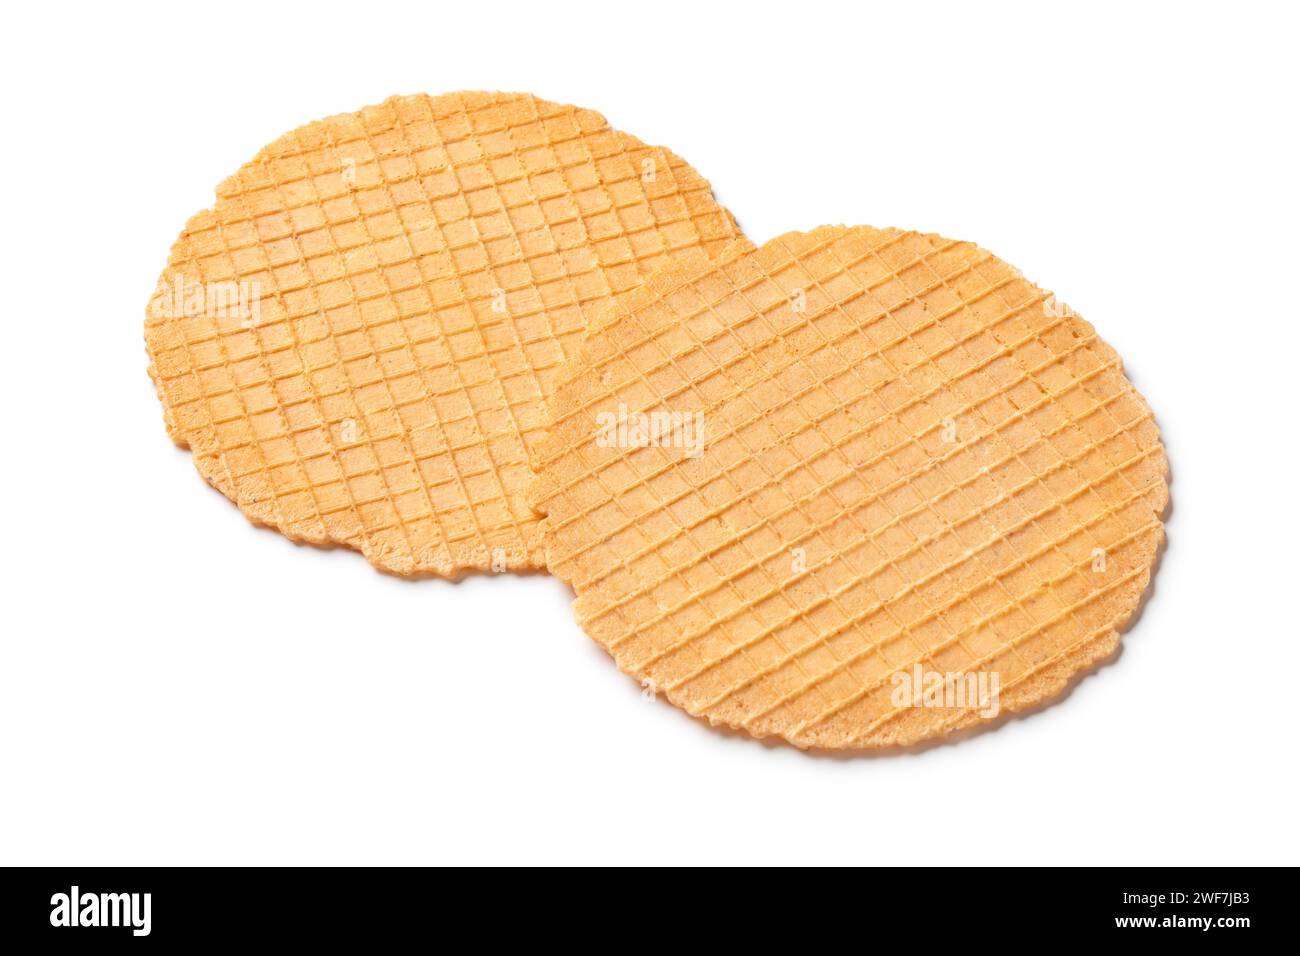 Pair of homemade fresh baked thin cheese waffles as a snack close up Stock Photo